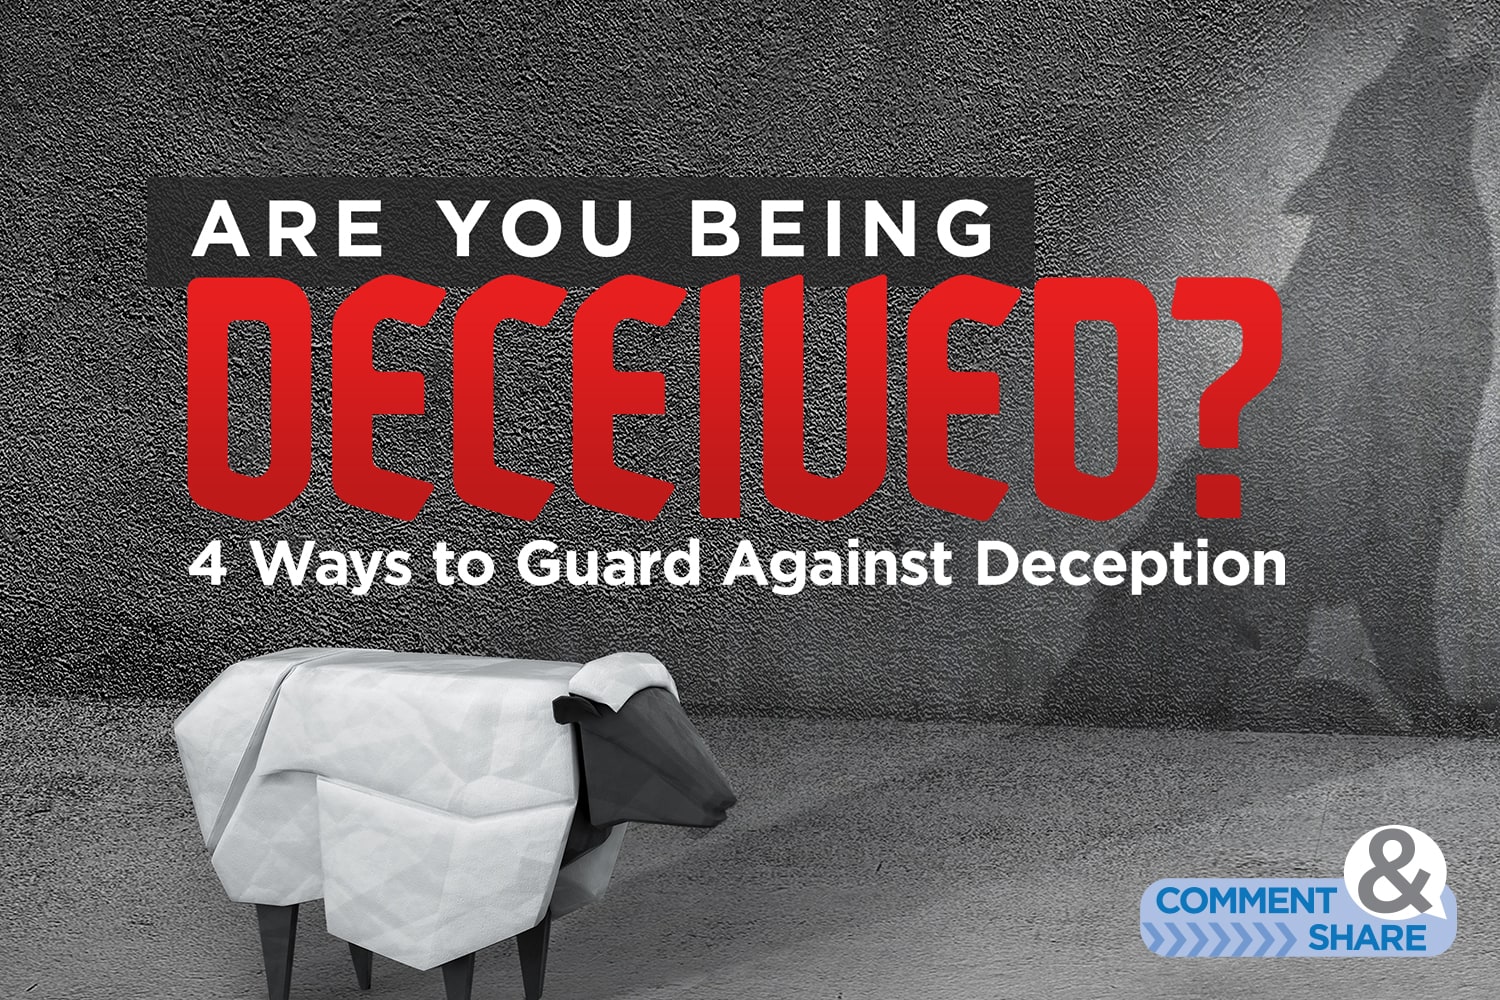 Are You Being Deceived?